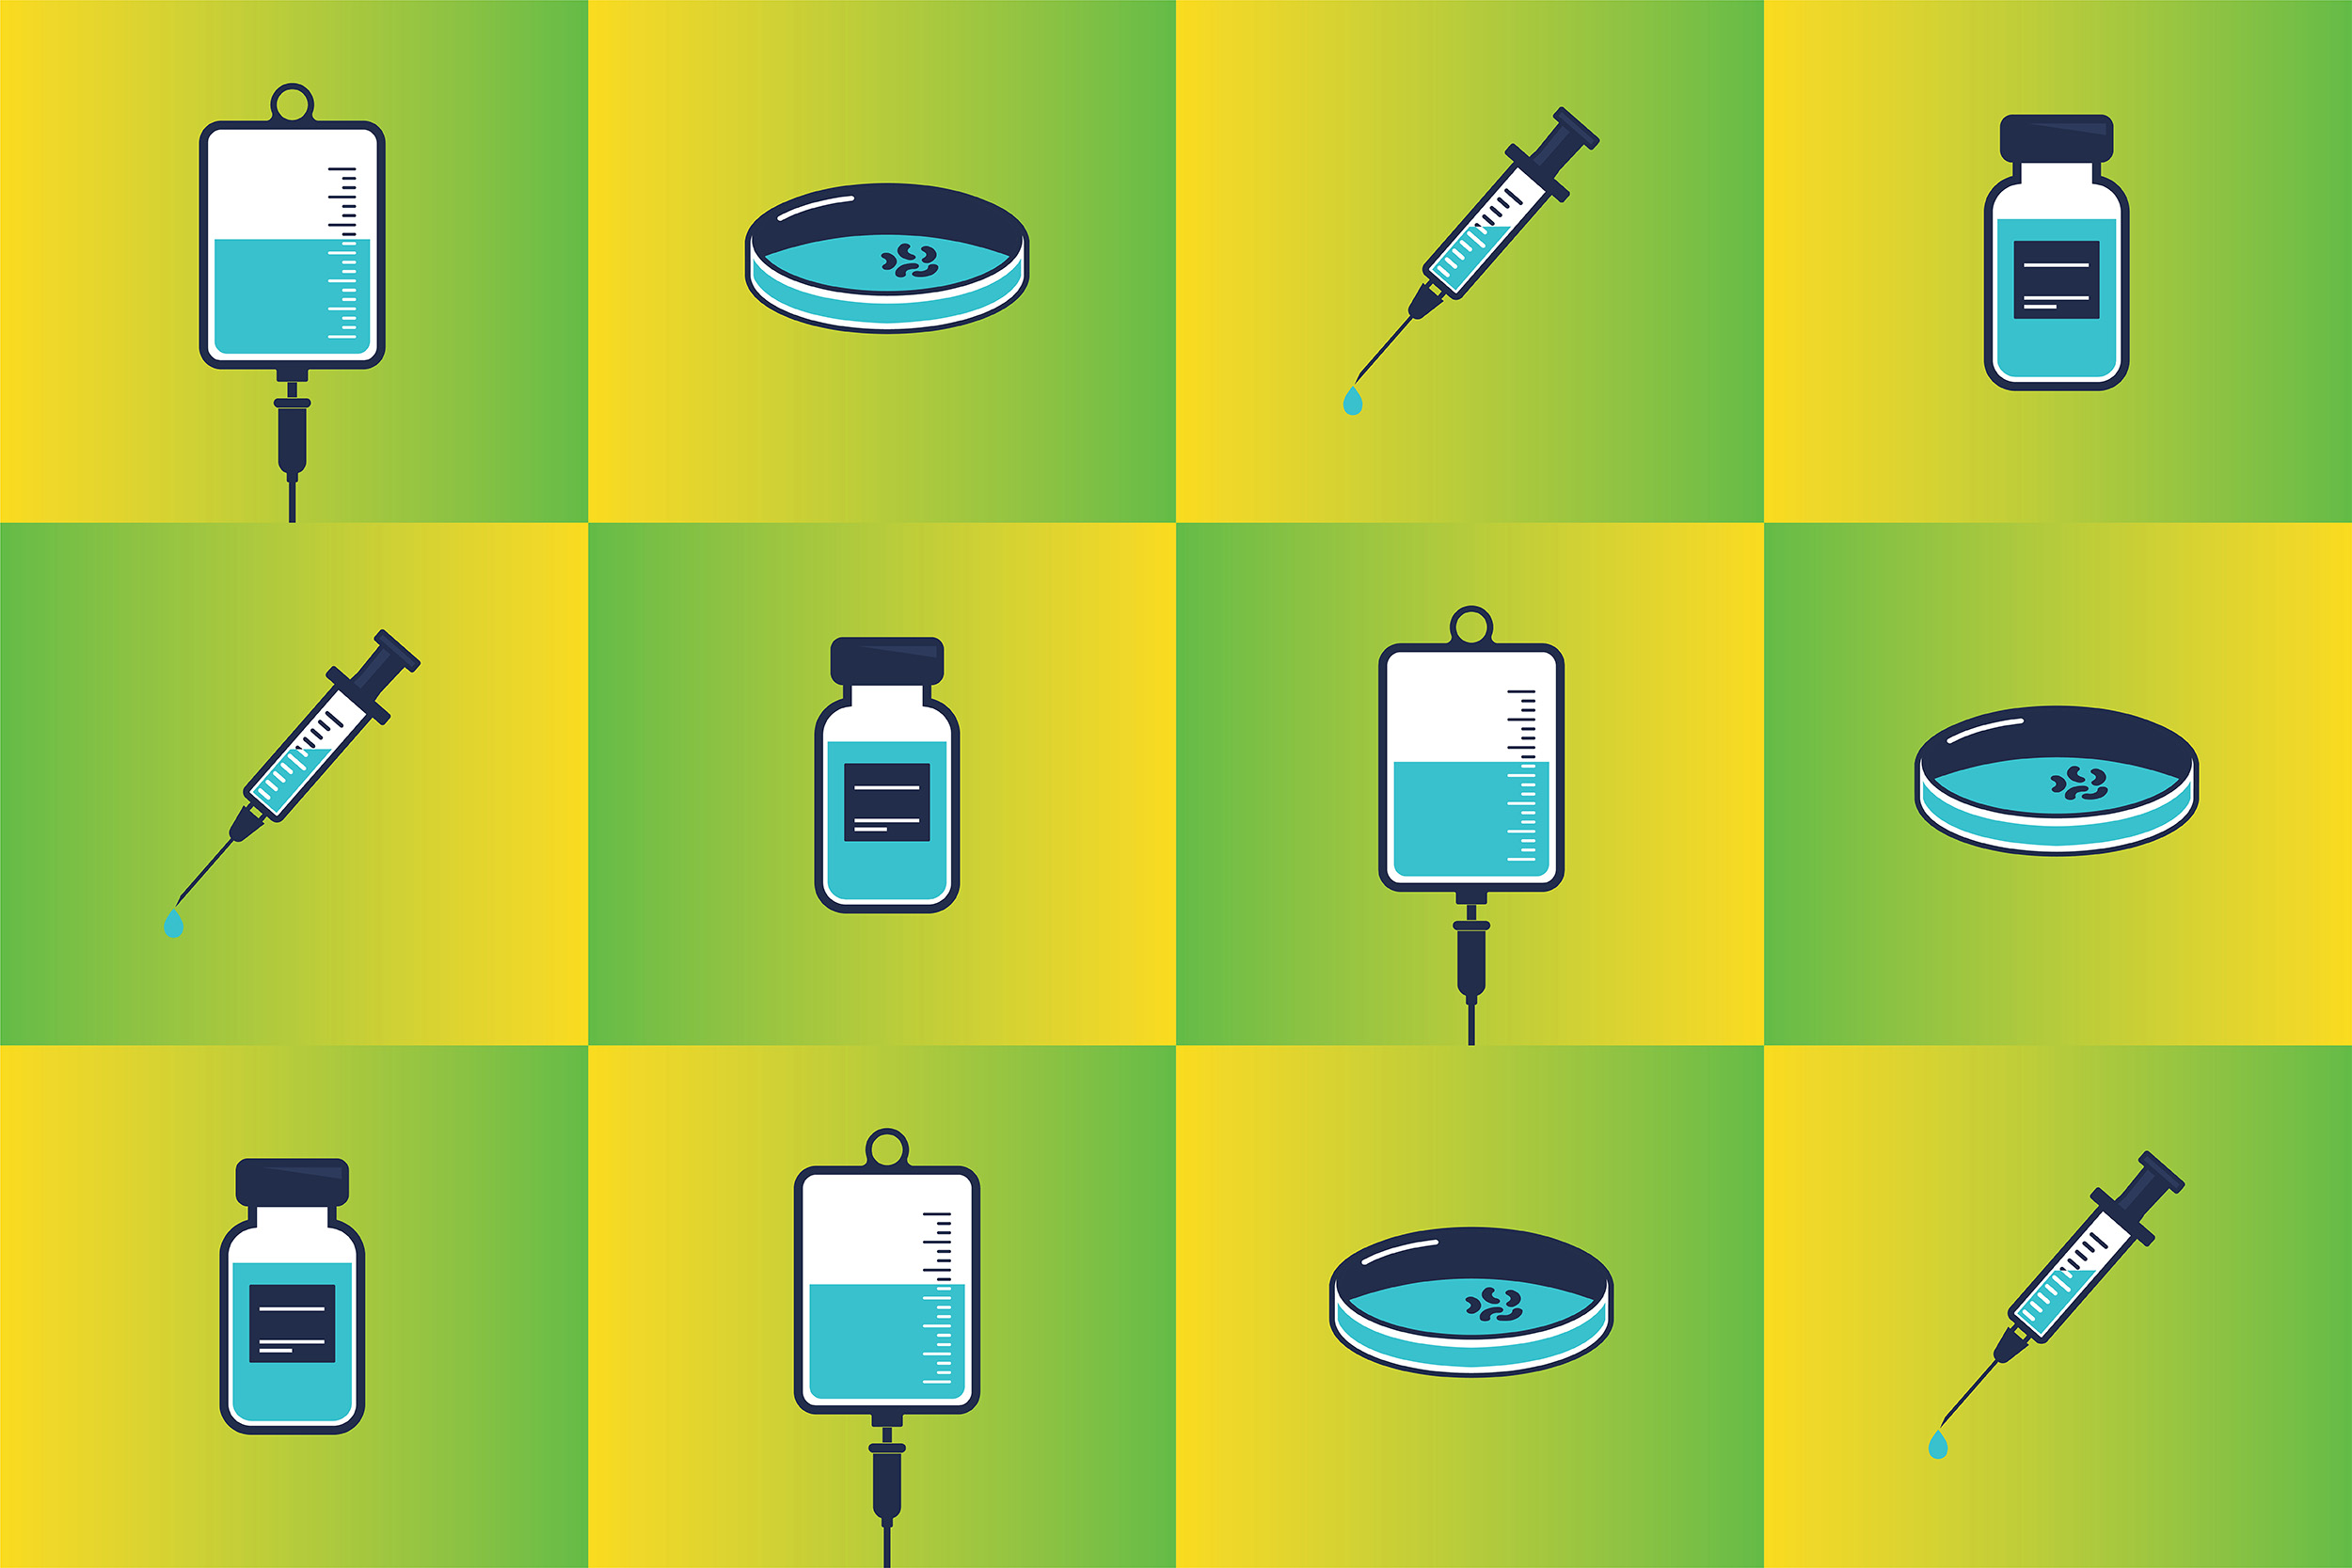 Illustrations of iv bag, petri dish, syringe, and medicine vial in random order of the three rows and 4 columns